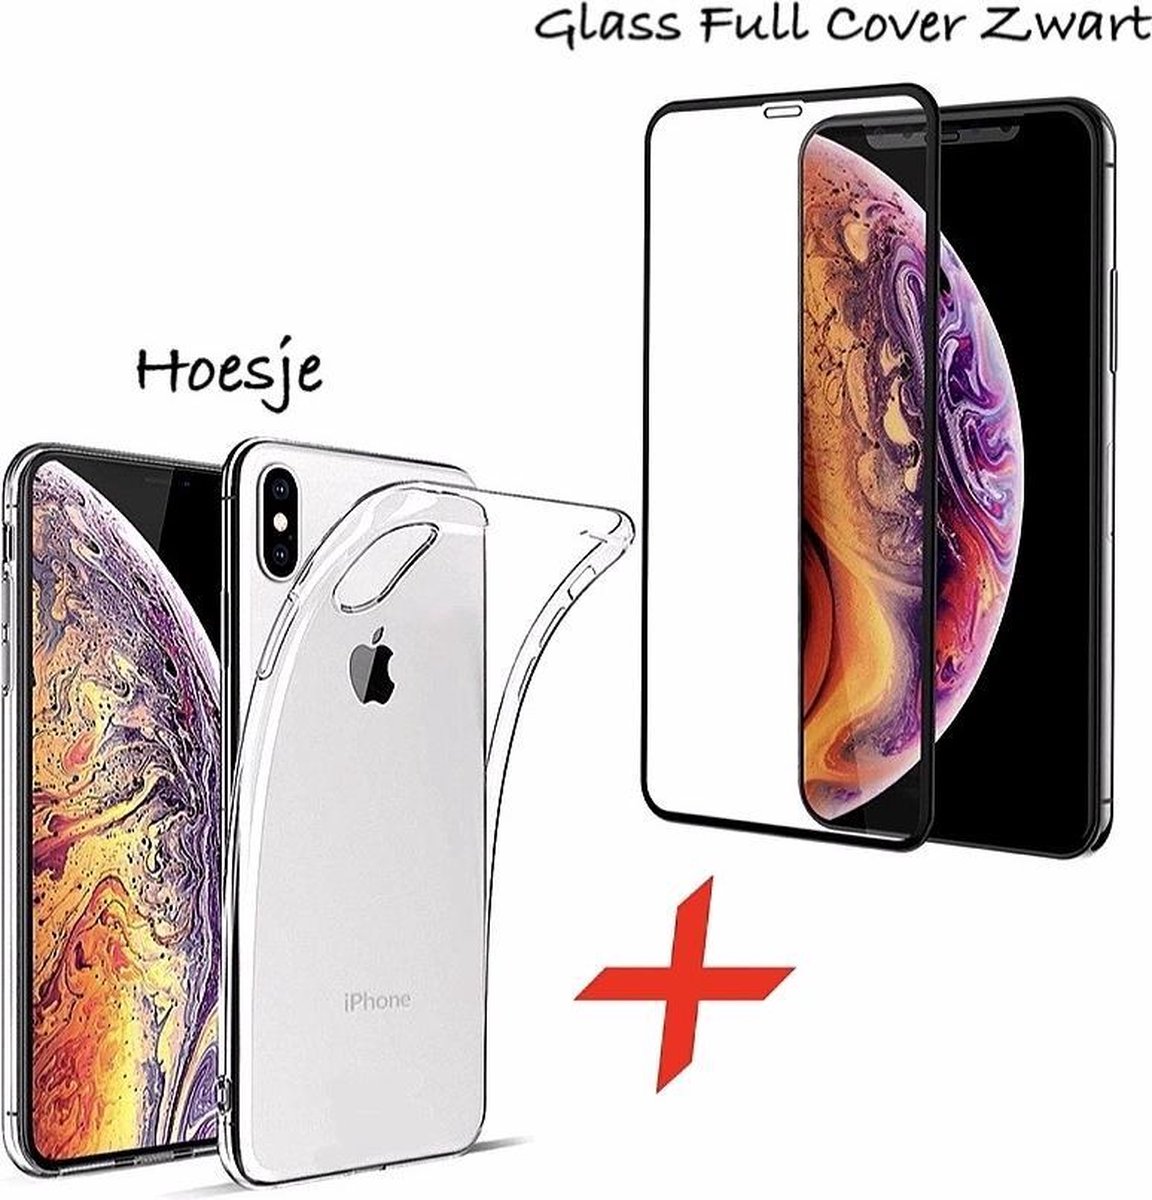 iPhone XR transparent Hoesje + Tempered Glass Screen protector Full Cover Zwart. Siliconen TPU Soft Case - Eff Pro